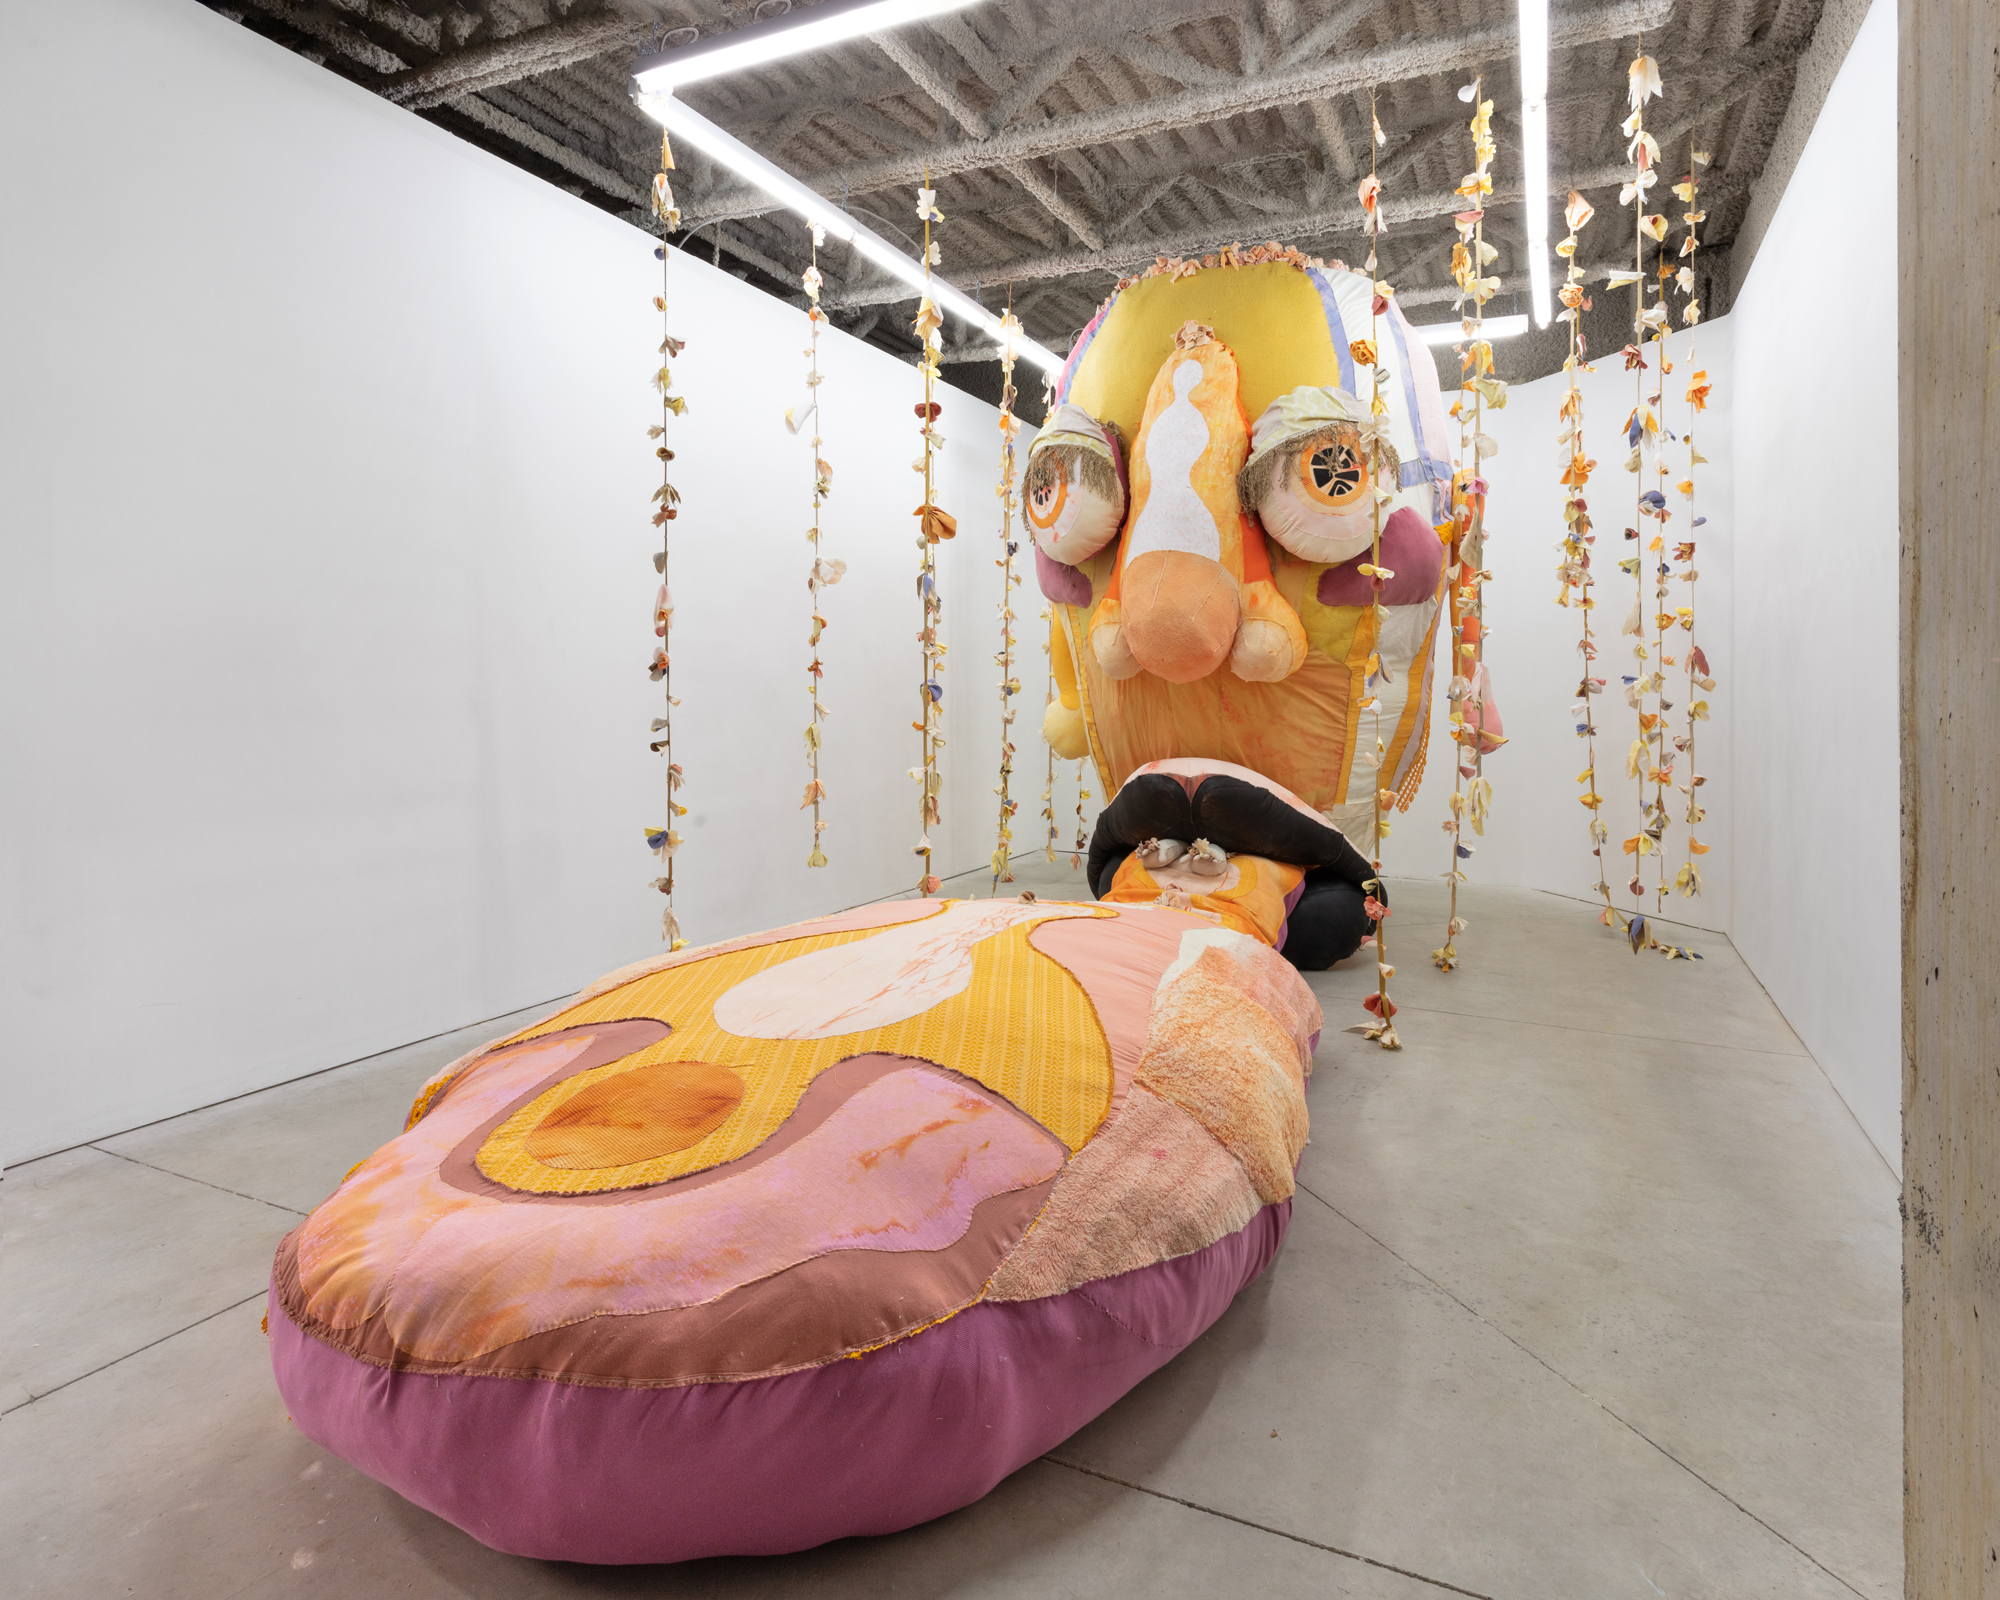 Image shows a large textile sculpture in a white cube space. The structure is a larger than life, expressive human head built from textiles. The head has a disproportionately large tongue extending out from its lips. The tongue stretches out across the floor. The head and tongue are colourful; pinks, yellows, blacks, whites and purples. Hanging around the head and tongue are long flower ropes suspended from the ceiling.